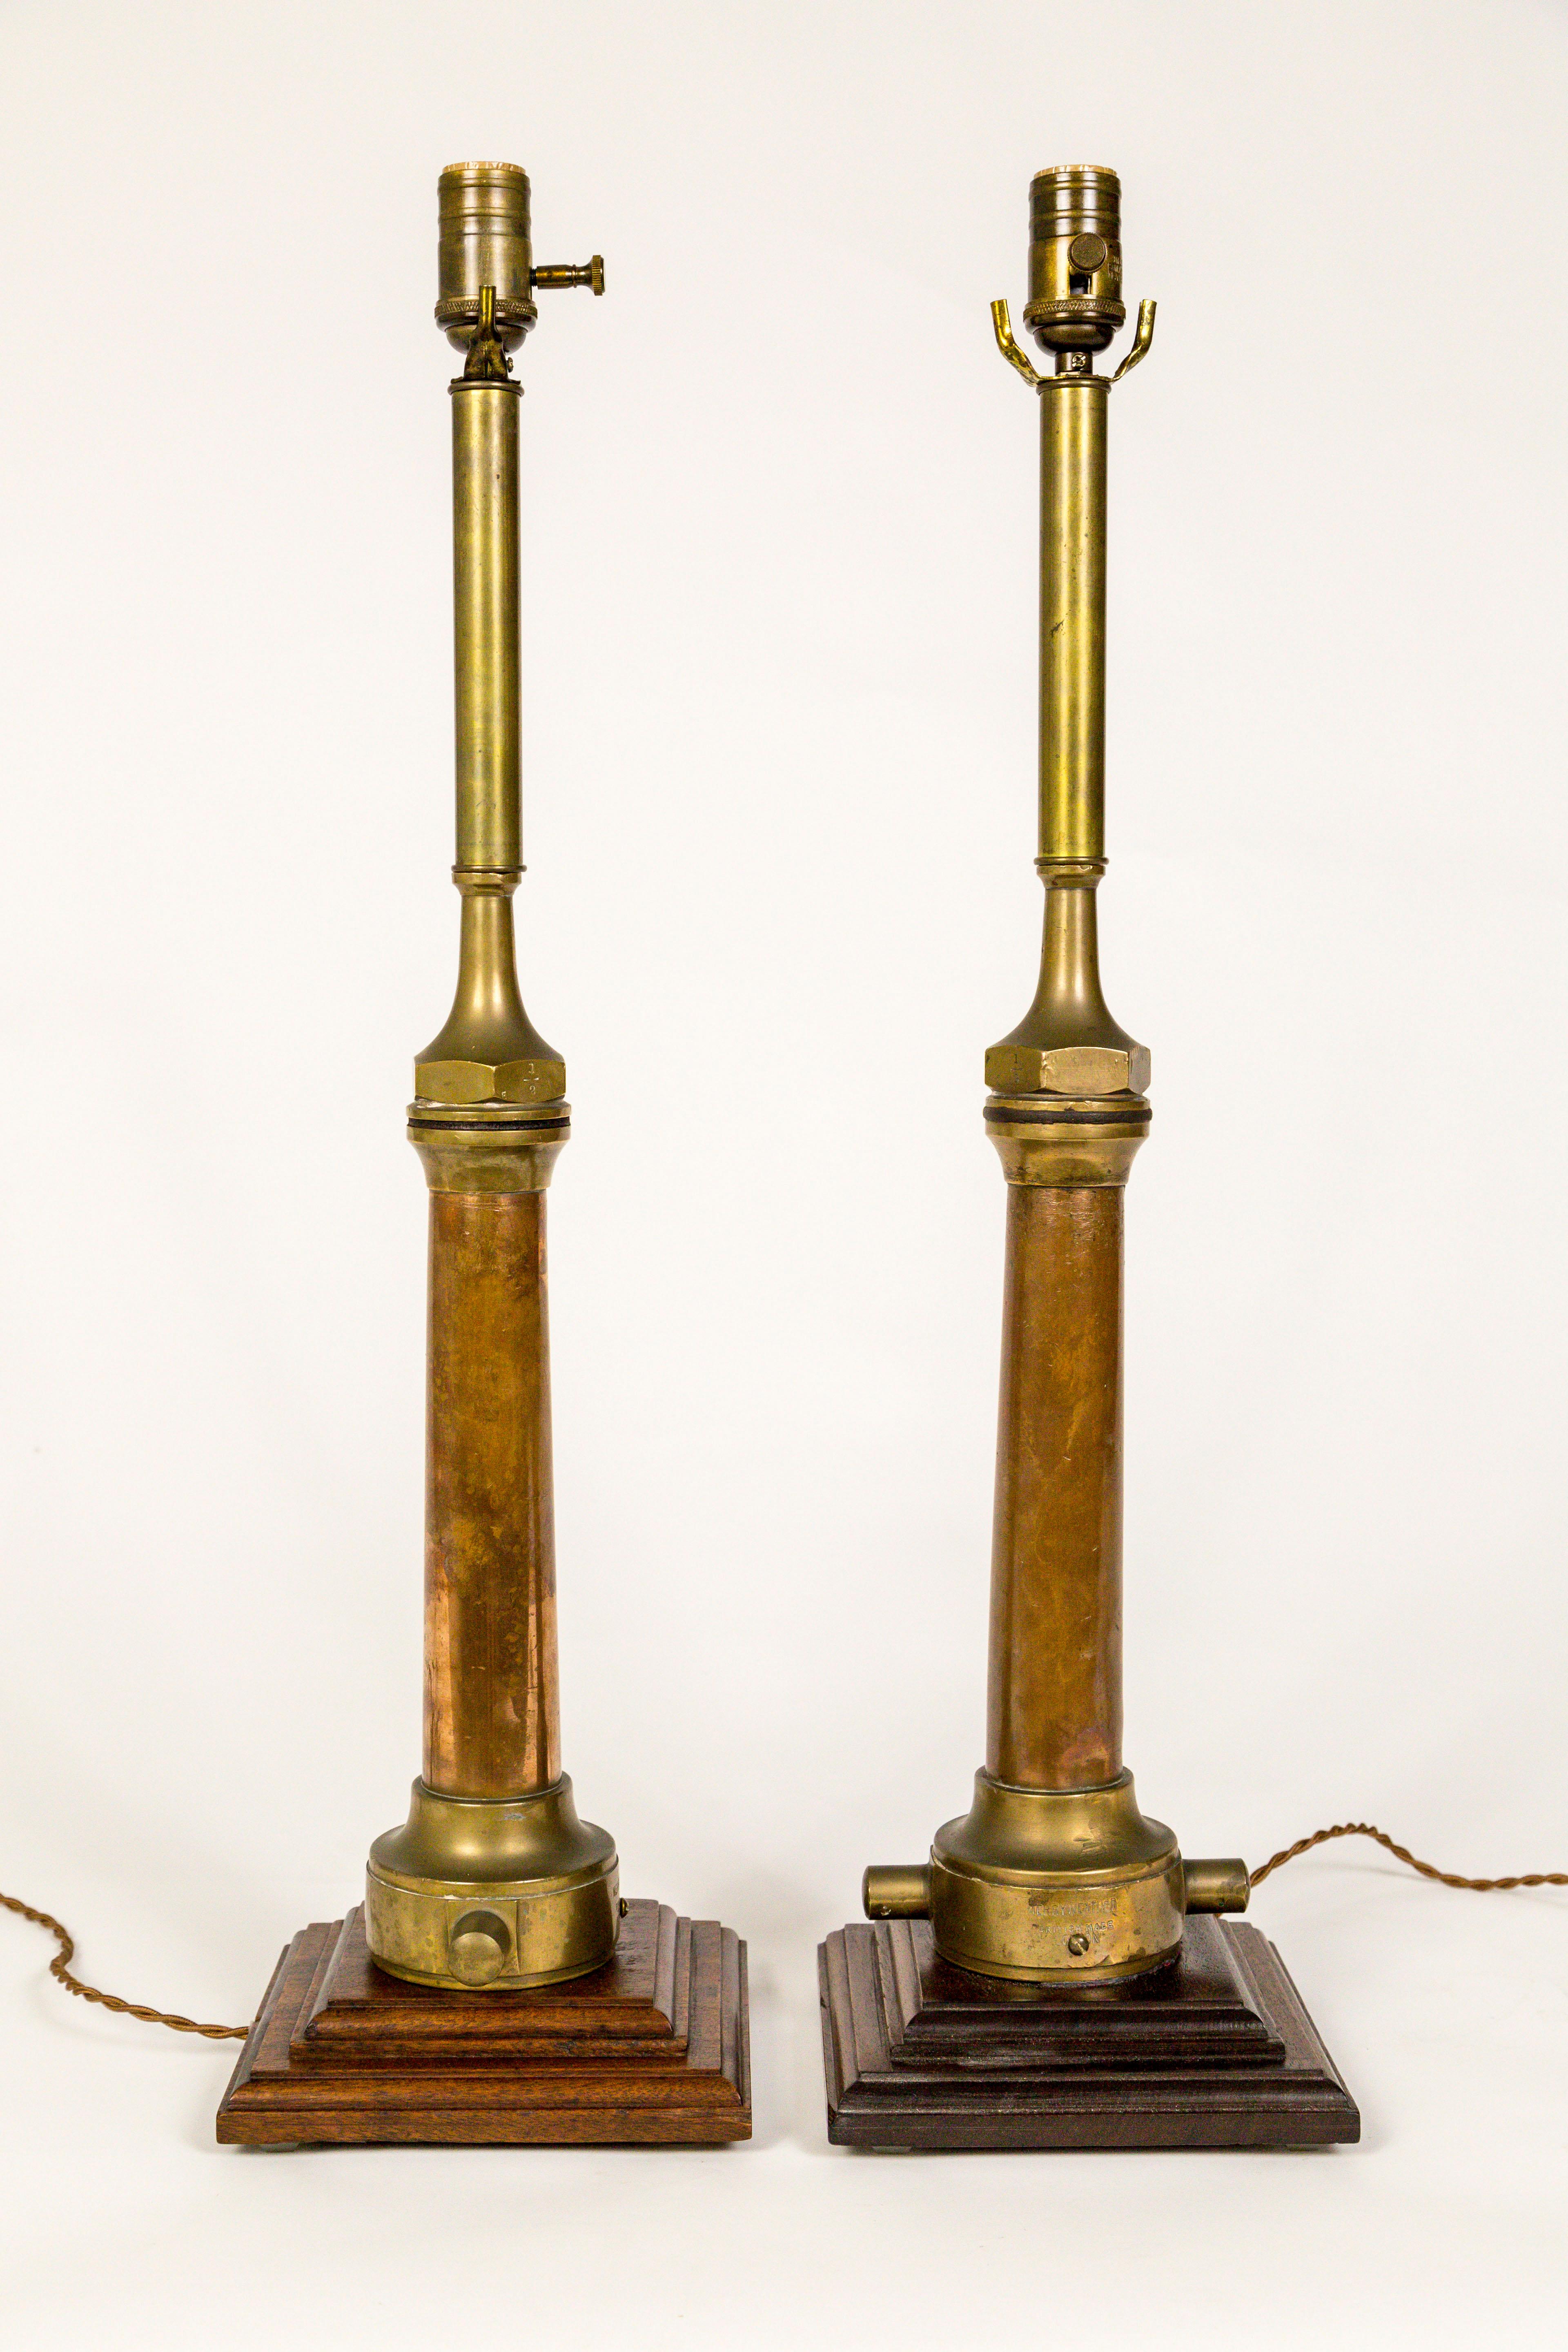 Early 20th Century Copper & Brass Victorian Fire Hose Nozzle Lamps (pair)